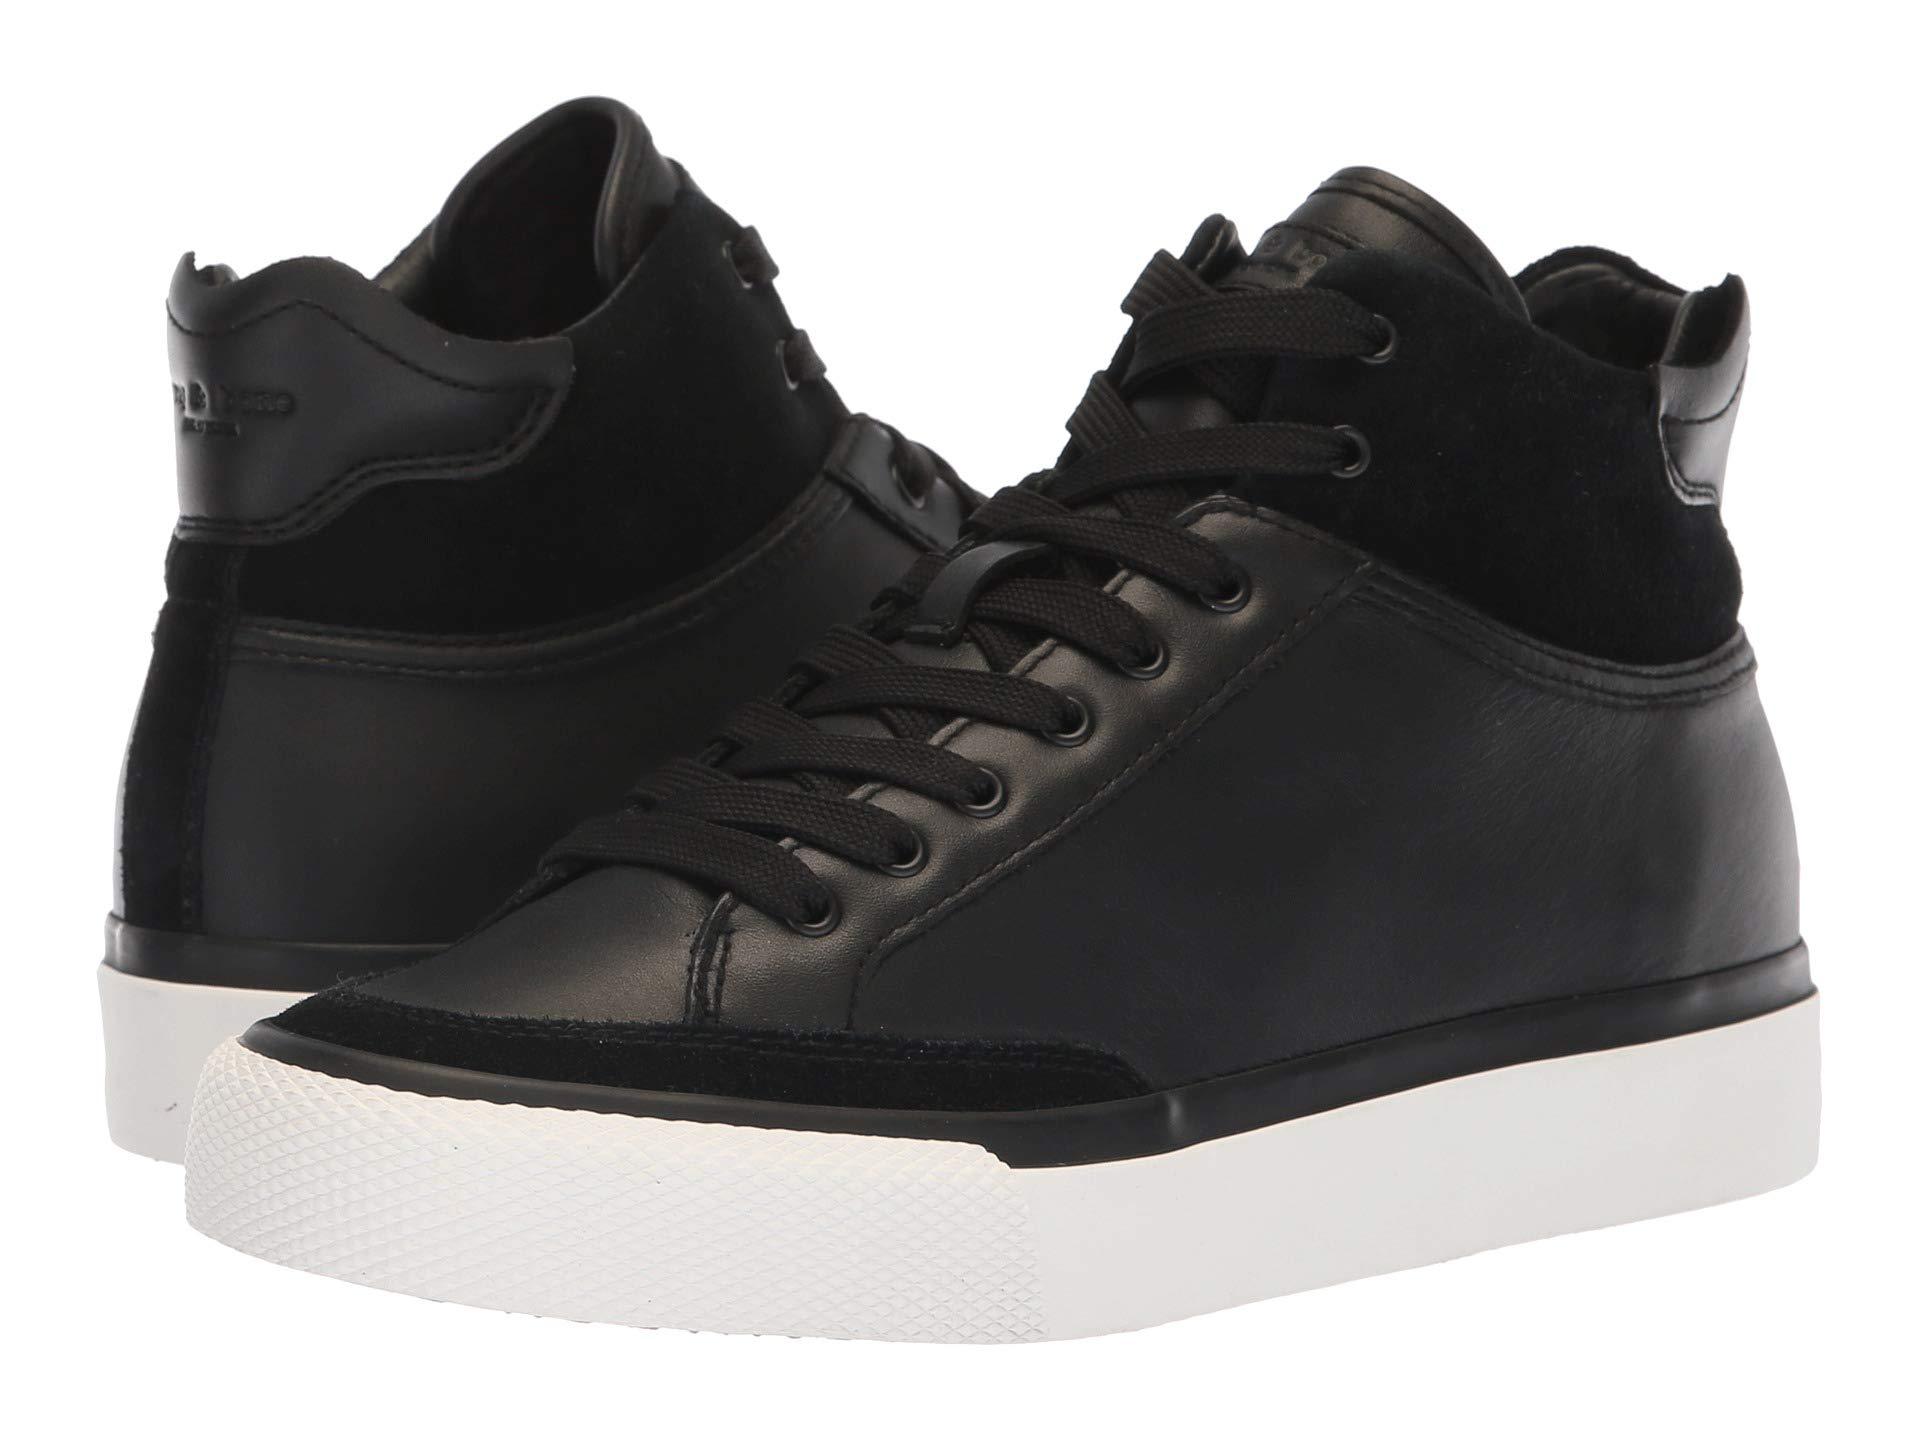 Rag & Bone Leather Rb Army High Sneaker in Black Leather (Black) - Save ...